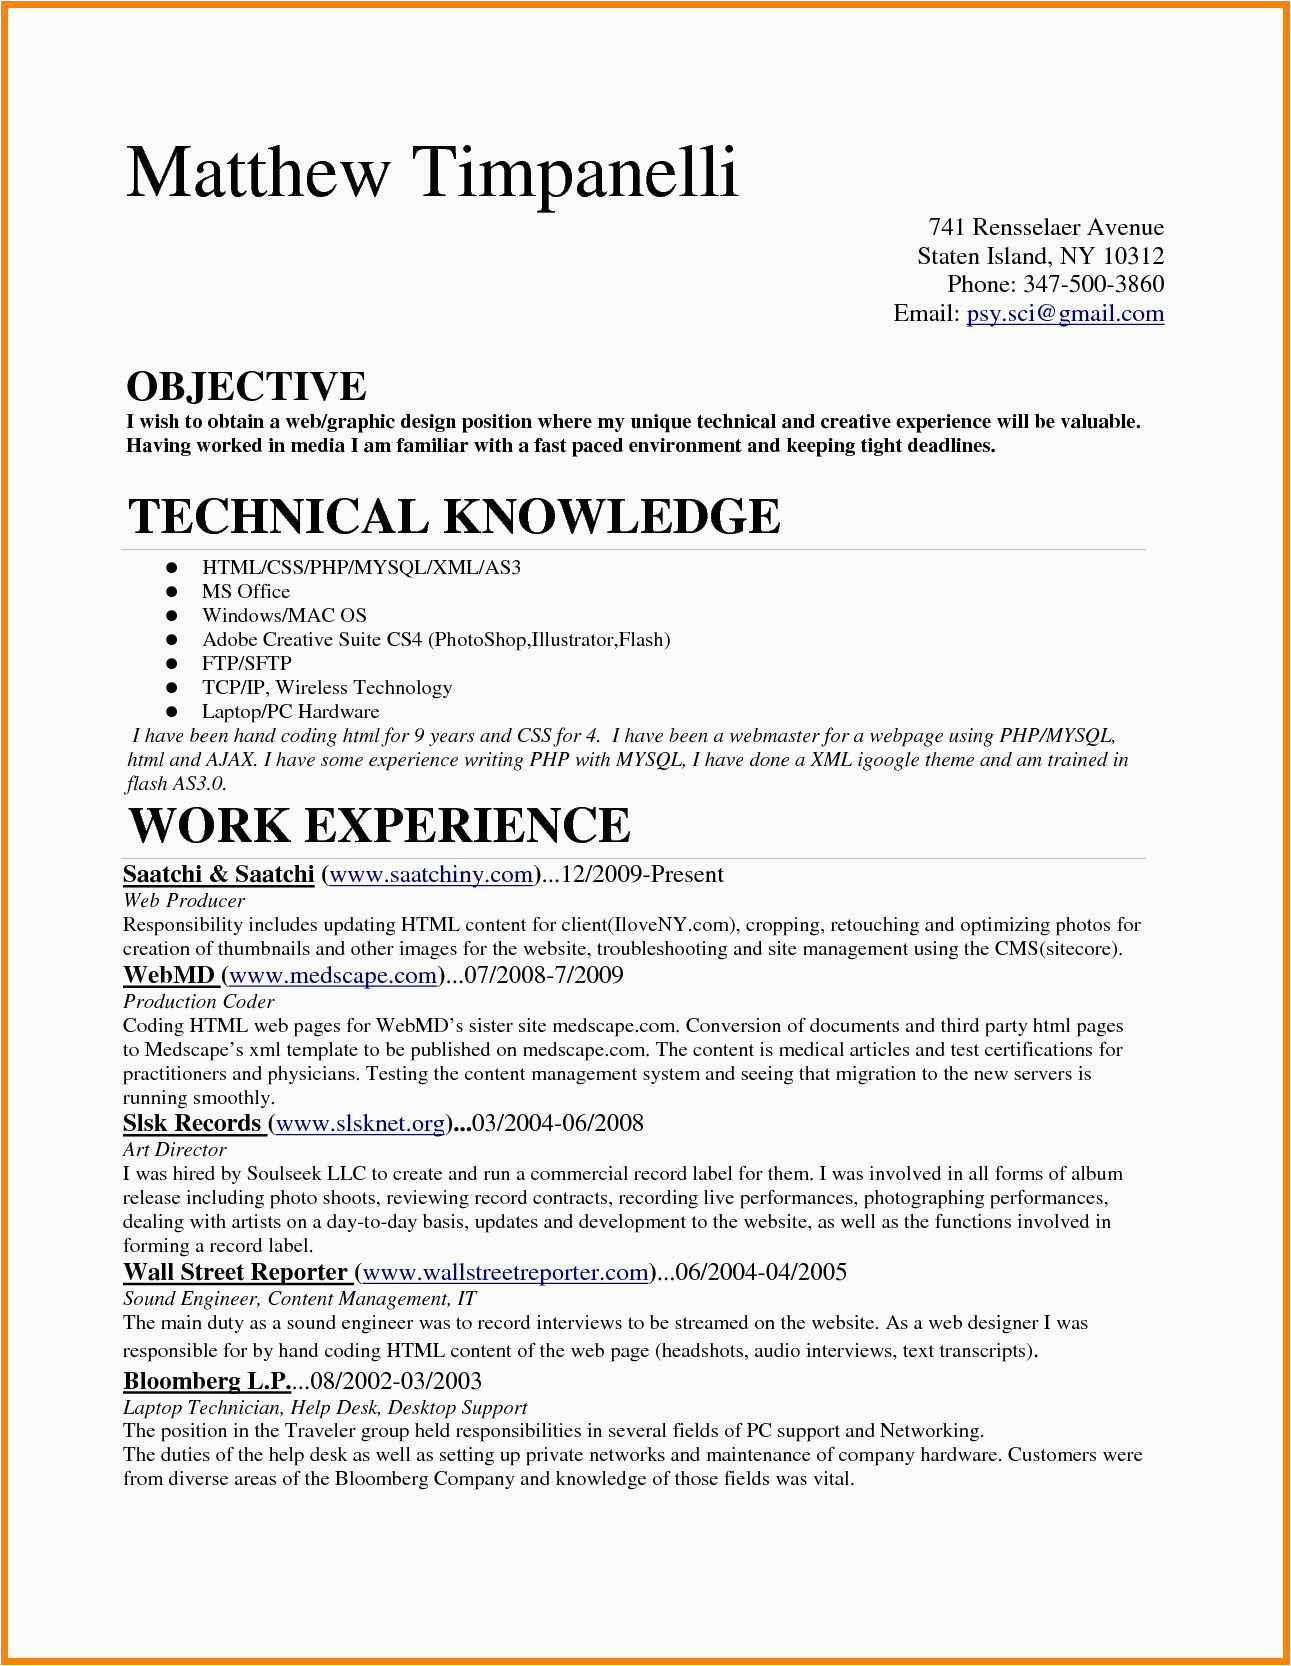 Sample Resume for Entry Level Medical Billing and Coding 23 Medical Coder Resume Examples In 2020 with Images